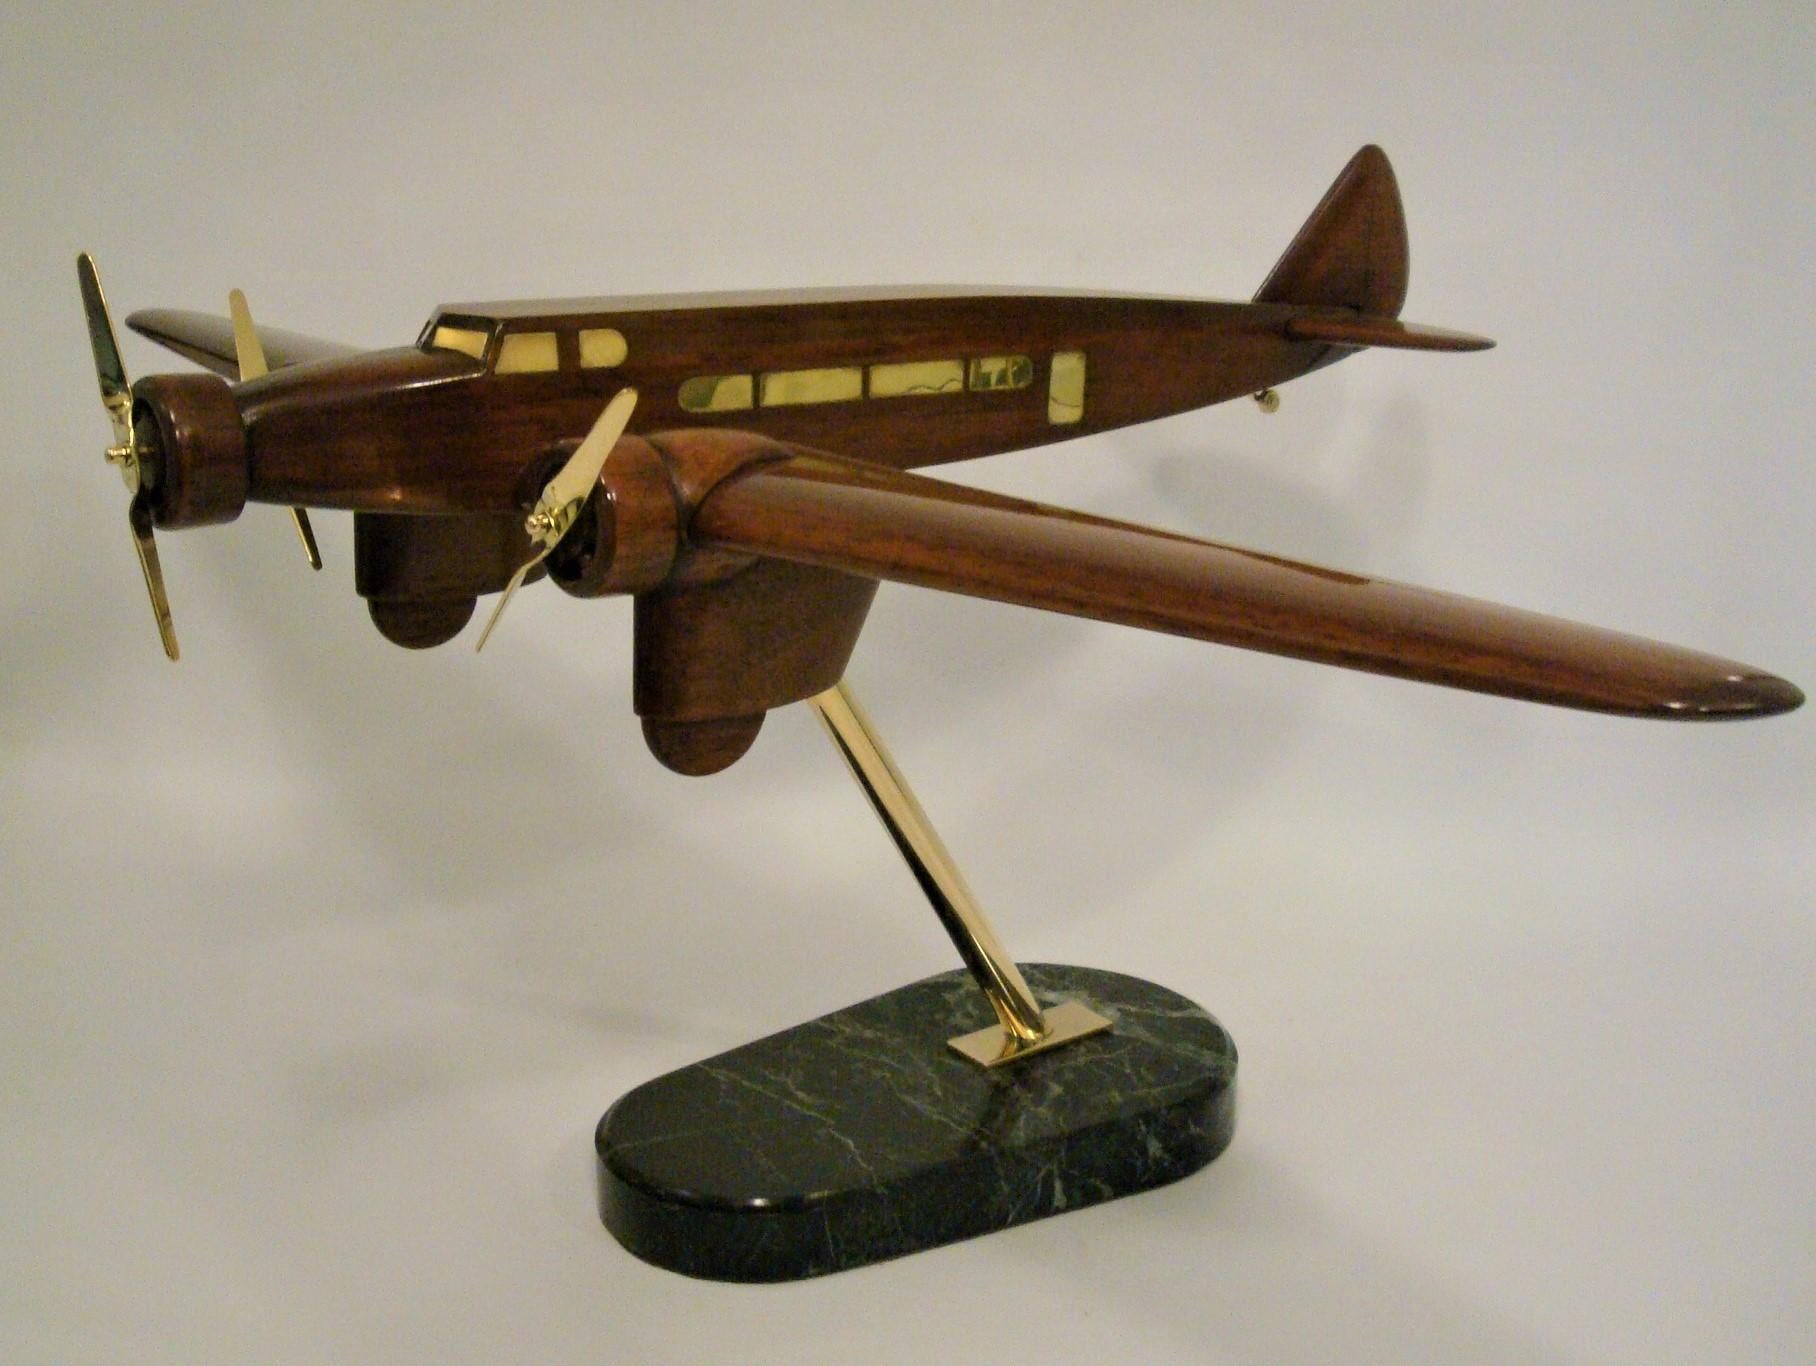 Brass Art Deco Dewoitine Wooden Counters Desk Model Airplane 1930s French For Sale